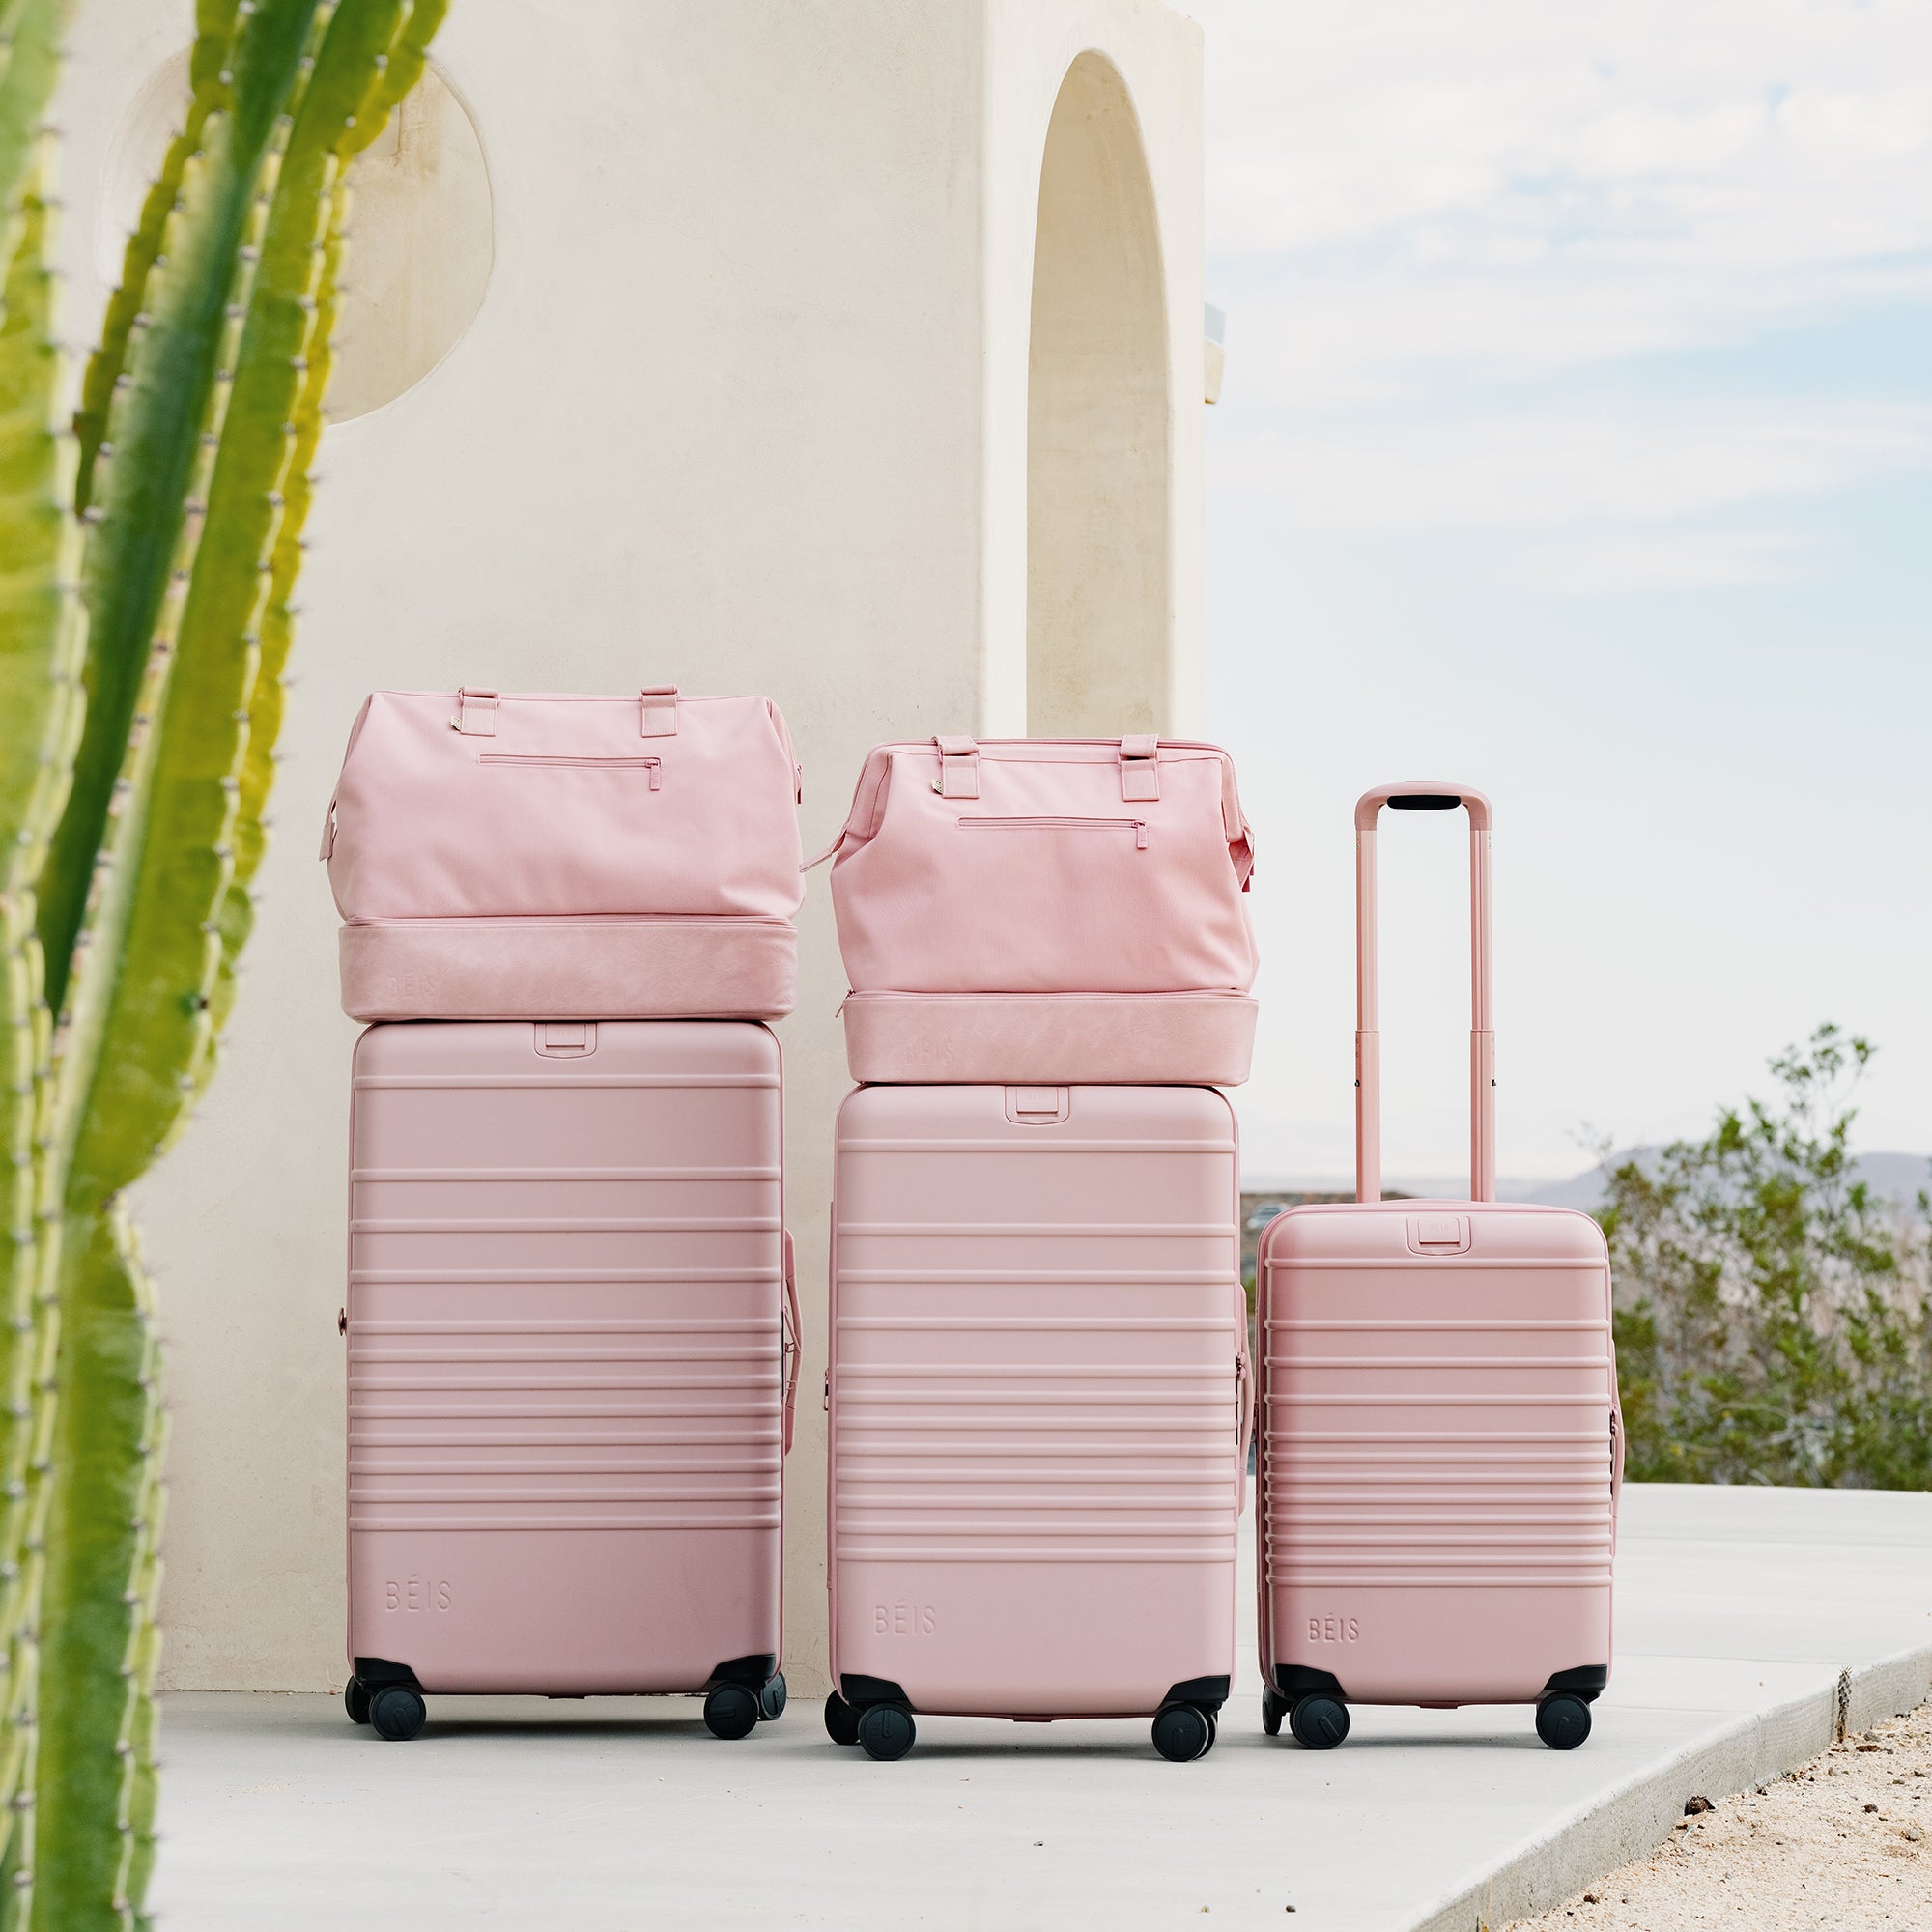 Shop The Bigger Carry-On suitcase